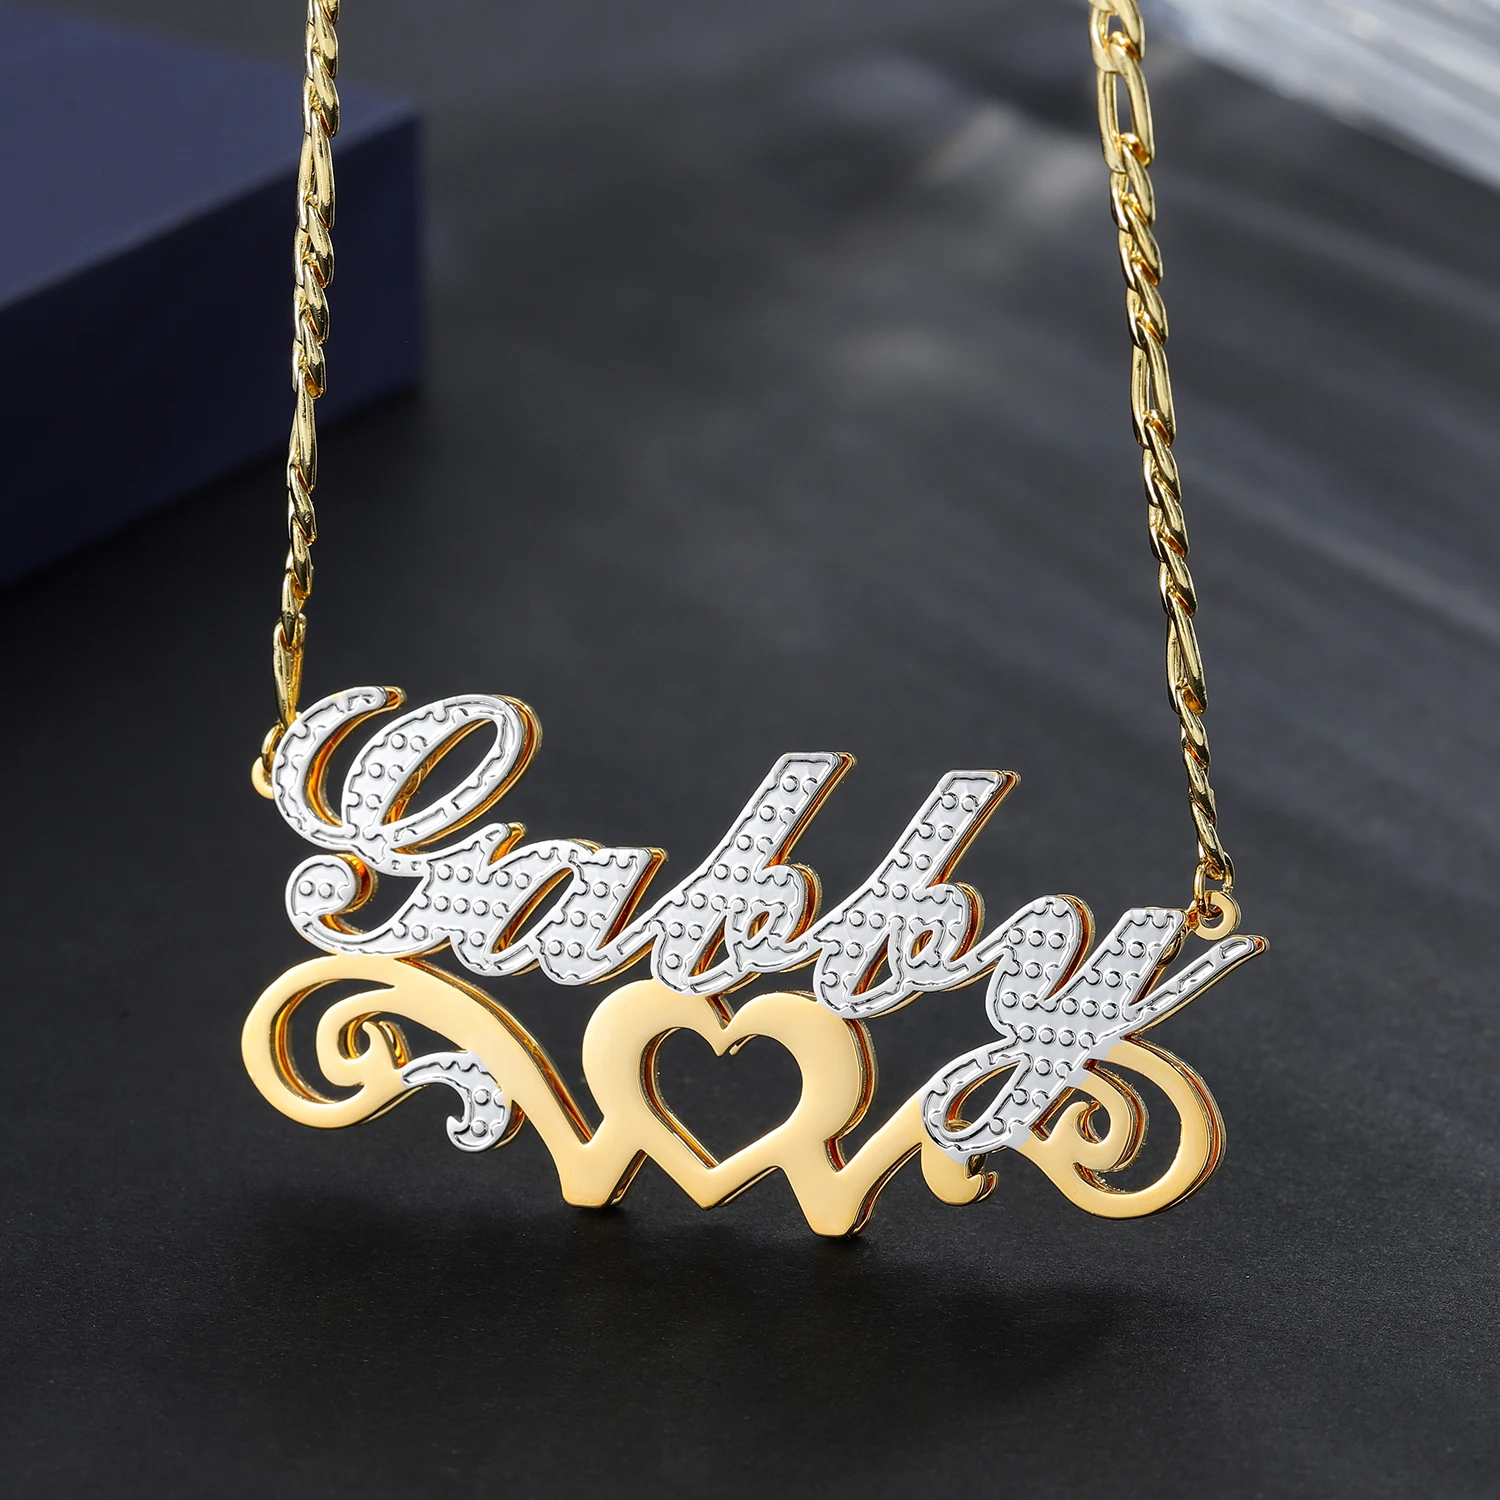 heavenly minded mom Customized Necklace Double Plated Heavenly Love Name Necklace For Women Name Plate Stainless Steel Name Pendant Charm Jewelry